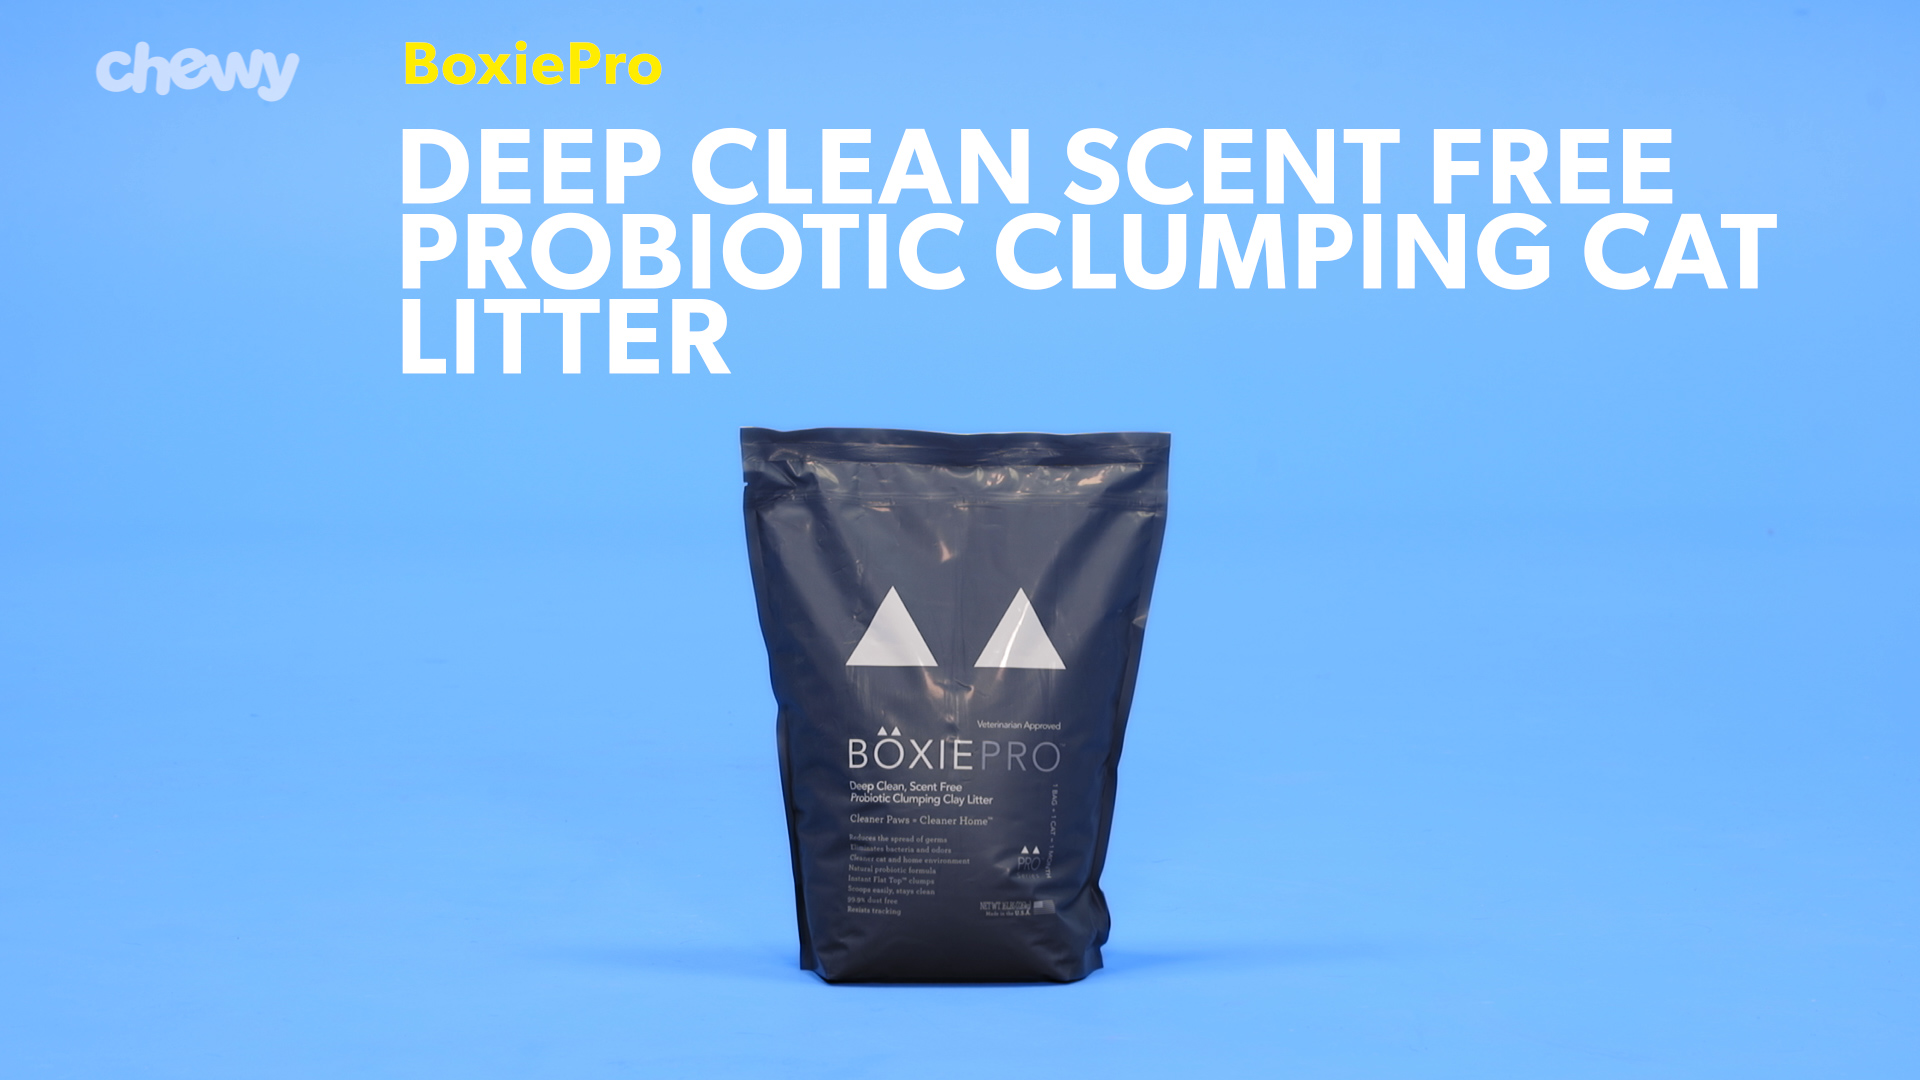 BoxiePro Deep Clean Scent Free Probiotic Clumping Litter 